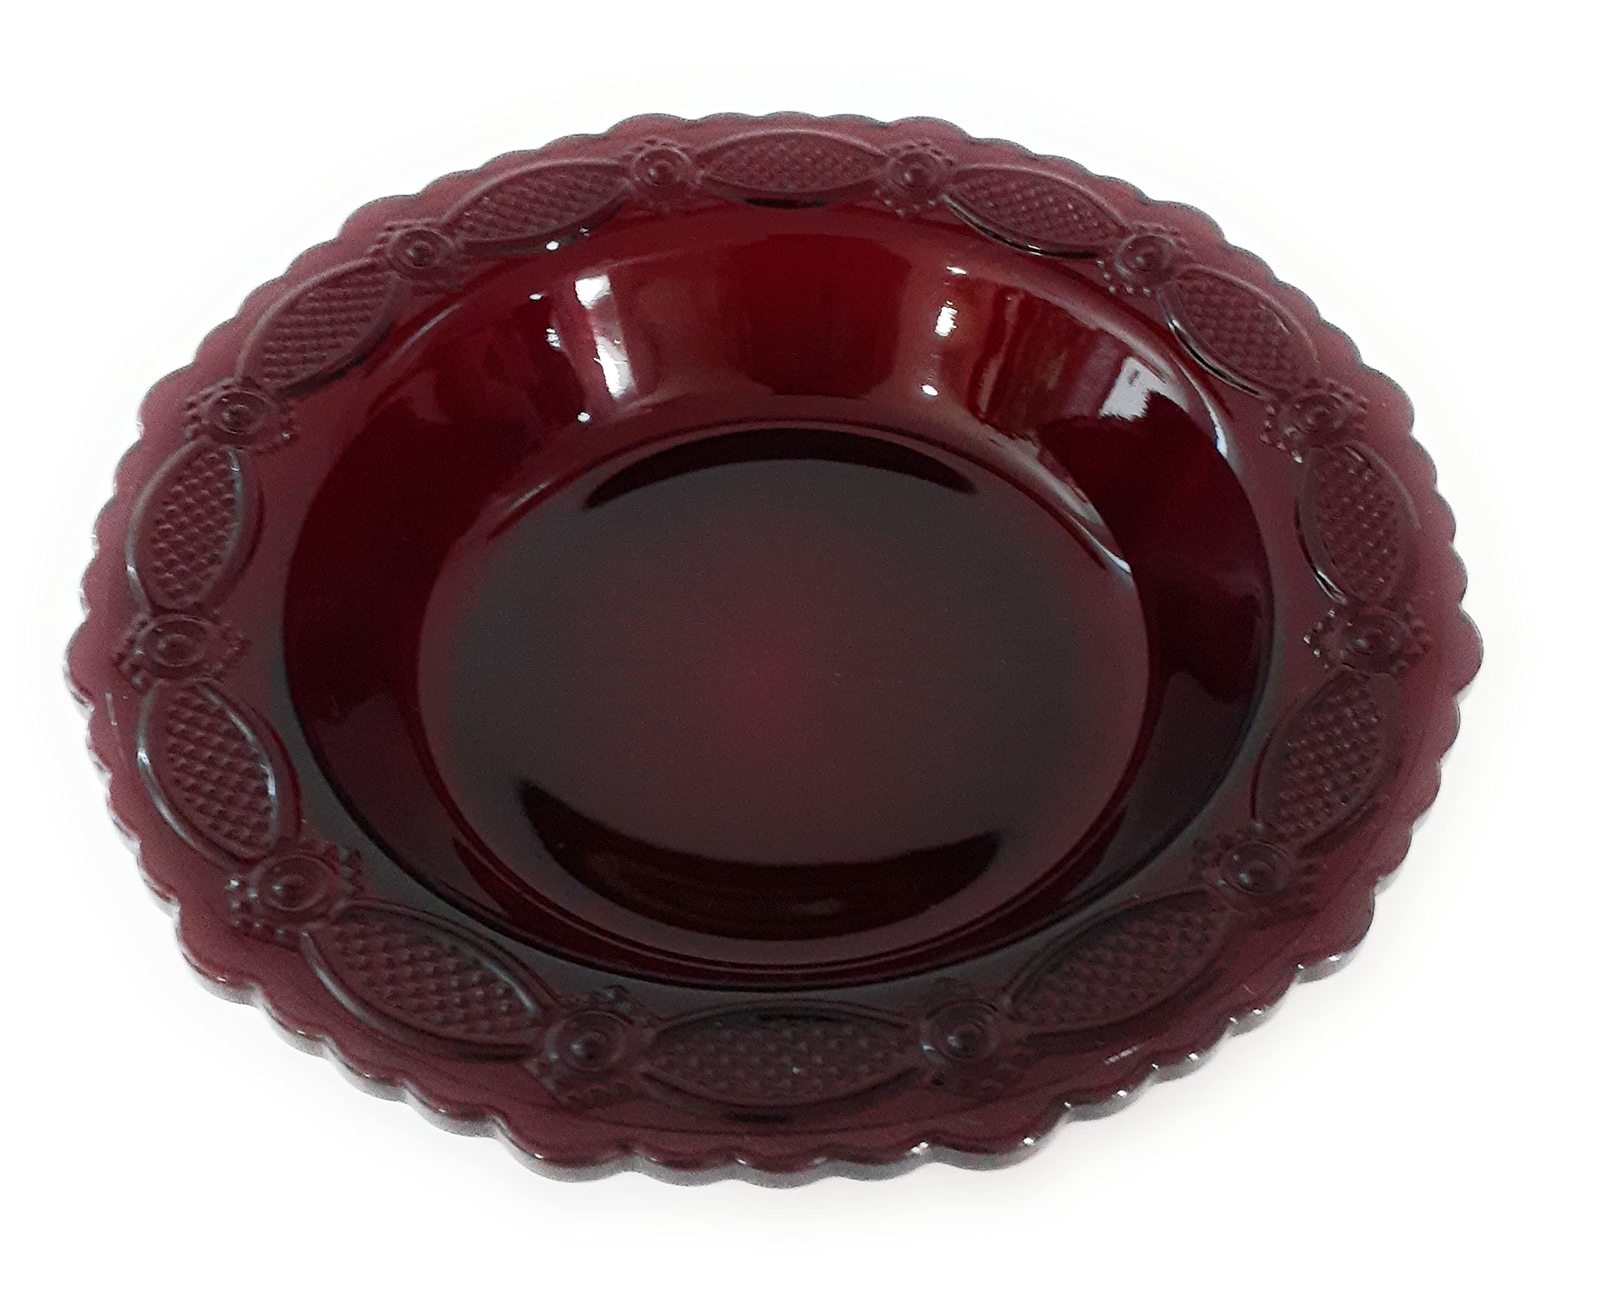 Primary image for Avon 1876 Cape Cod Rim Soup Bowl - Ruby Pattern